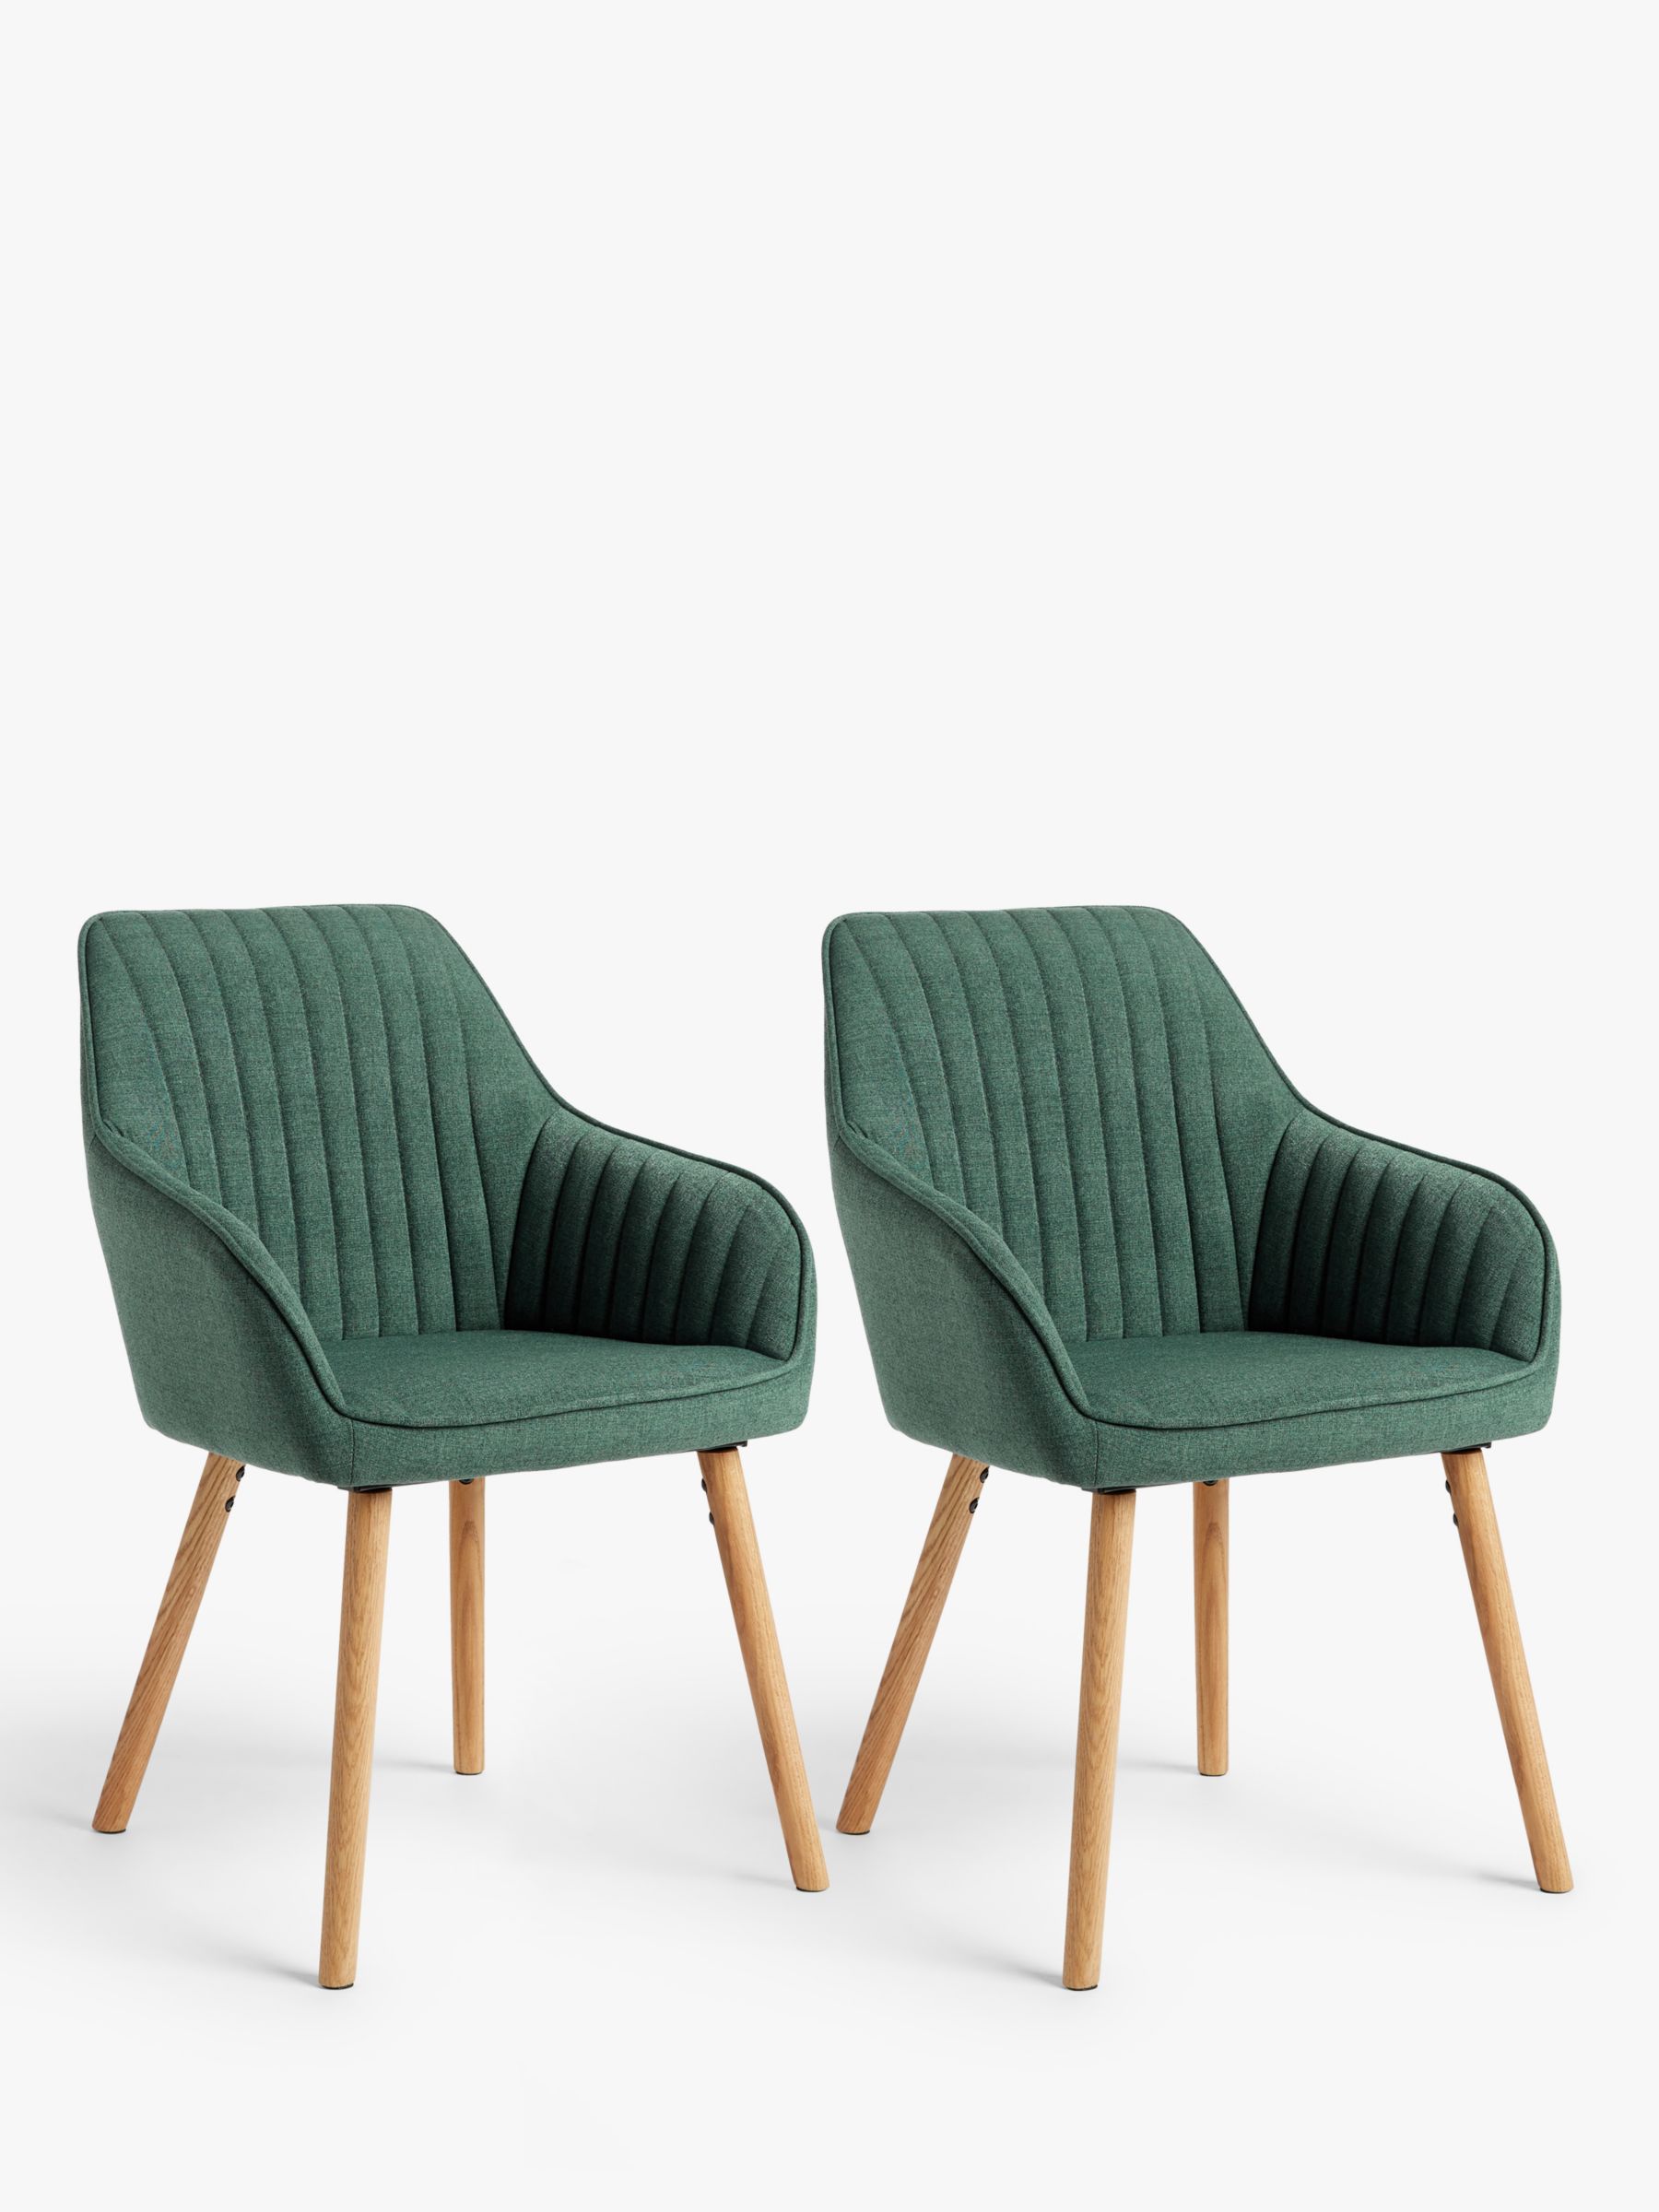 Green Dining Chairs John Lewis Partners